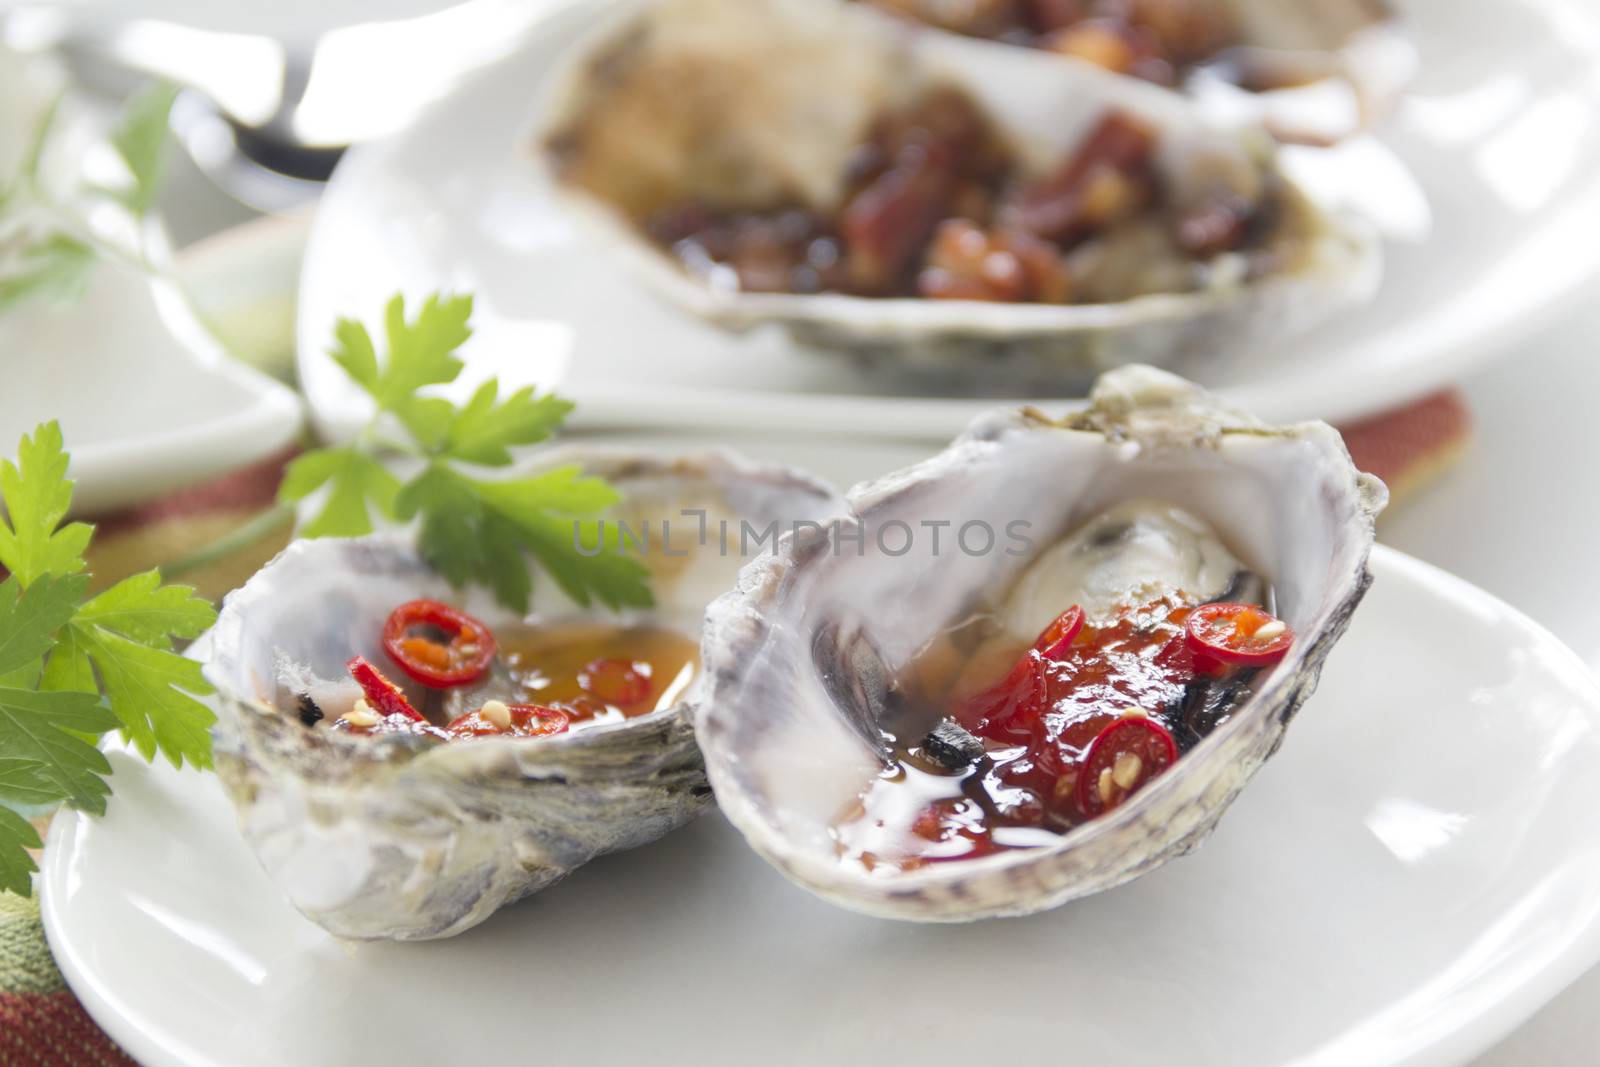 Platter of oysters with sweet chilli oysters and oysters kilpatrick with parsley.